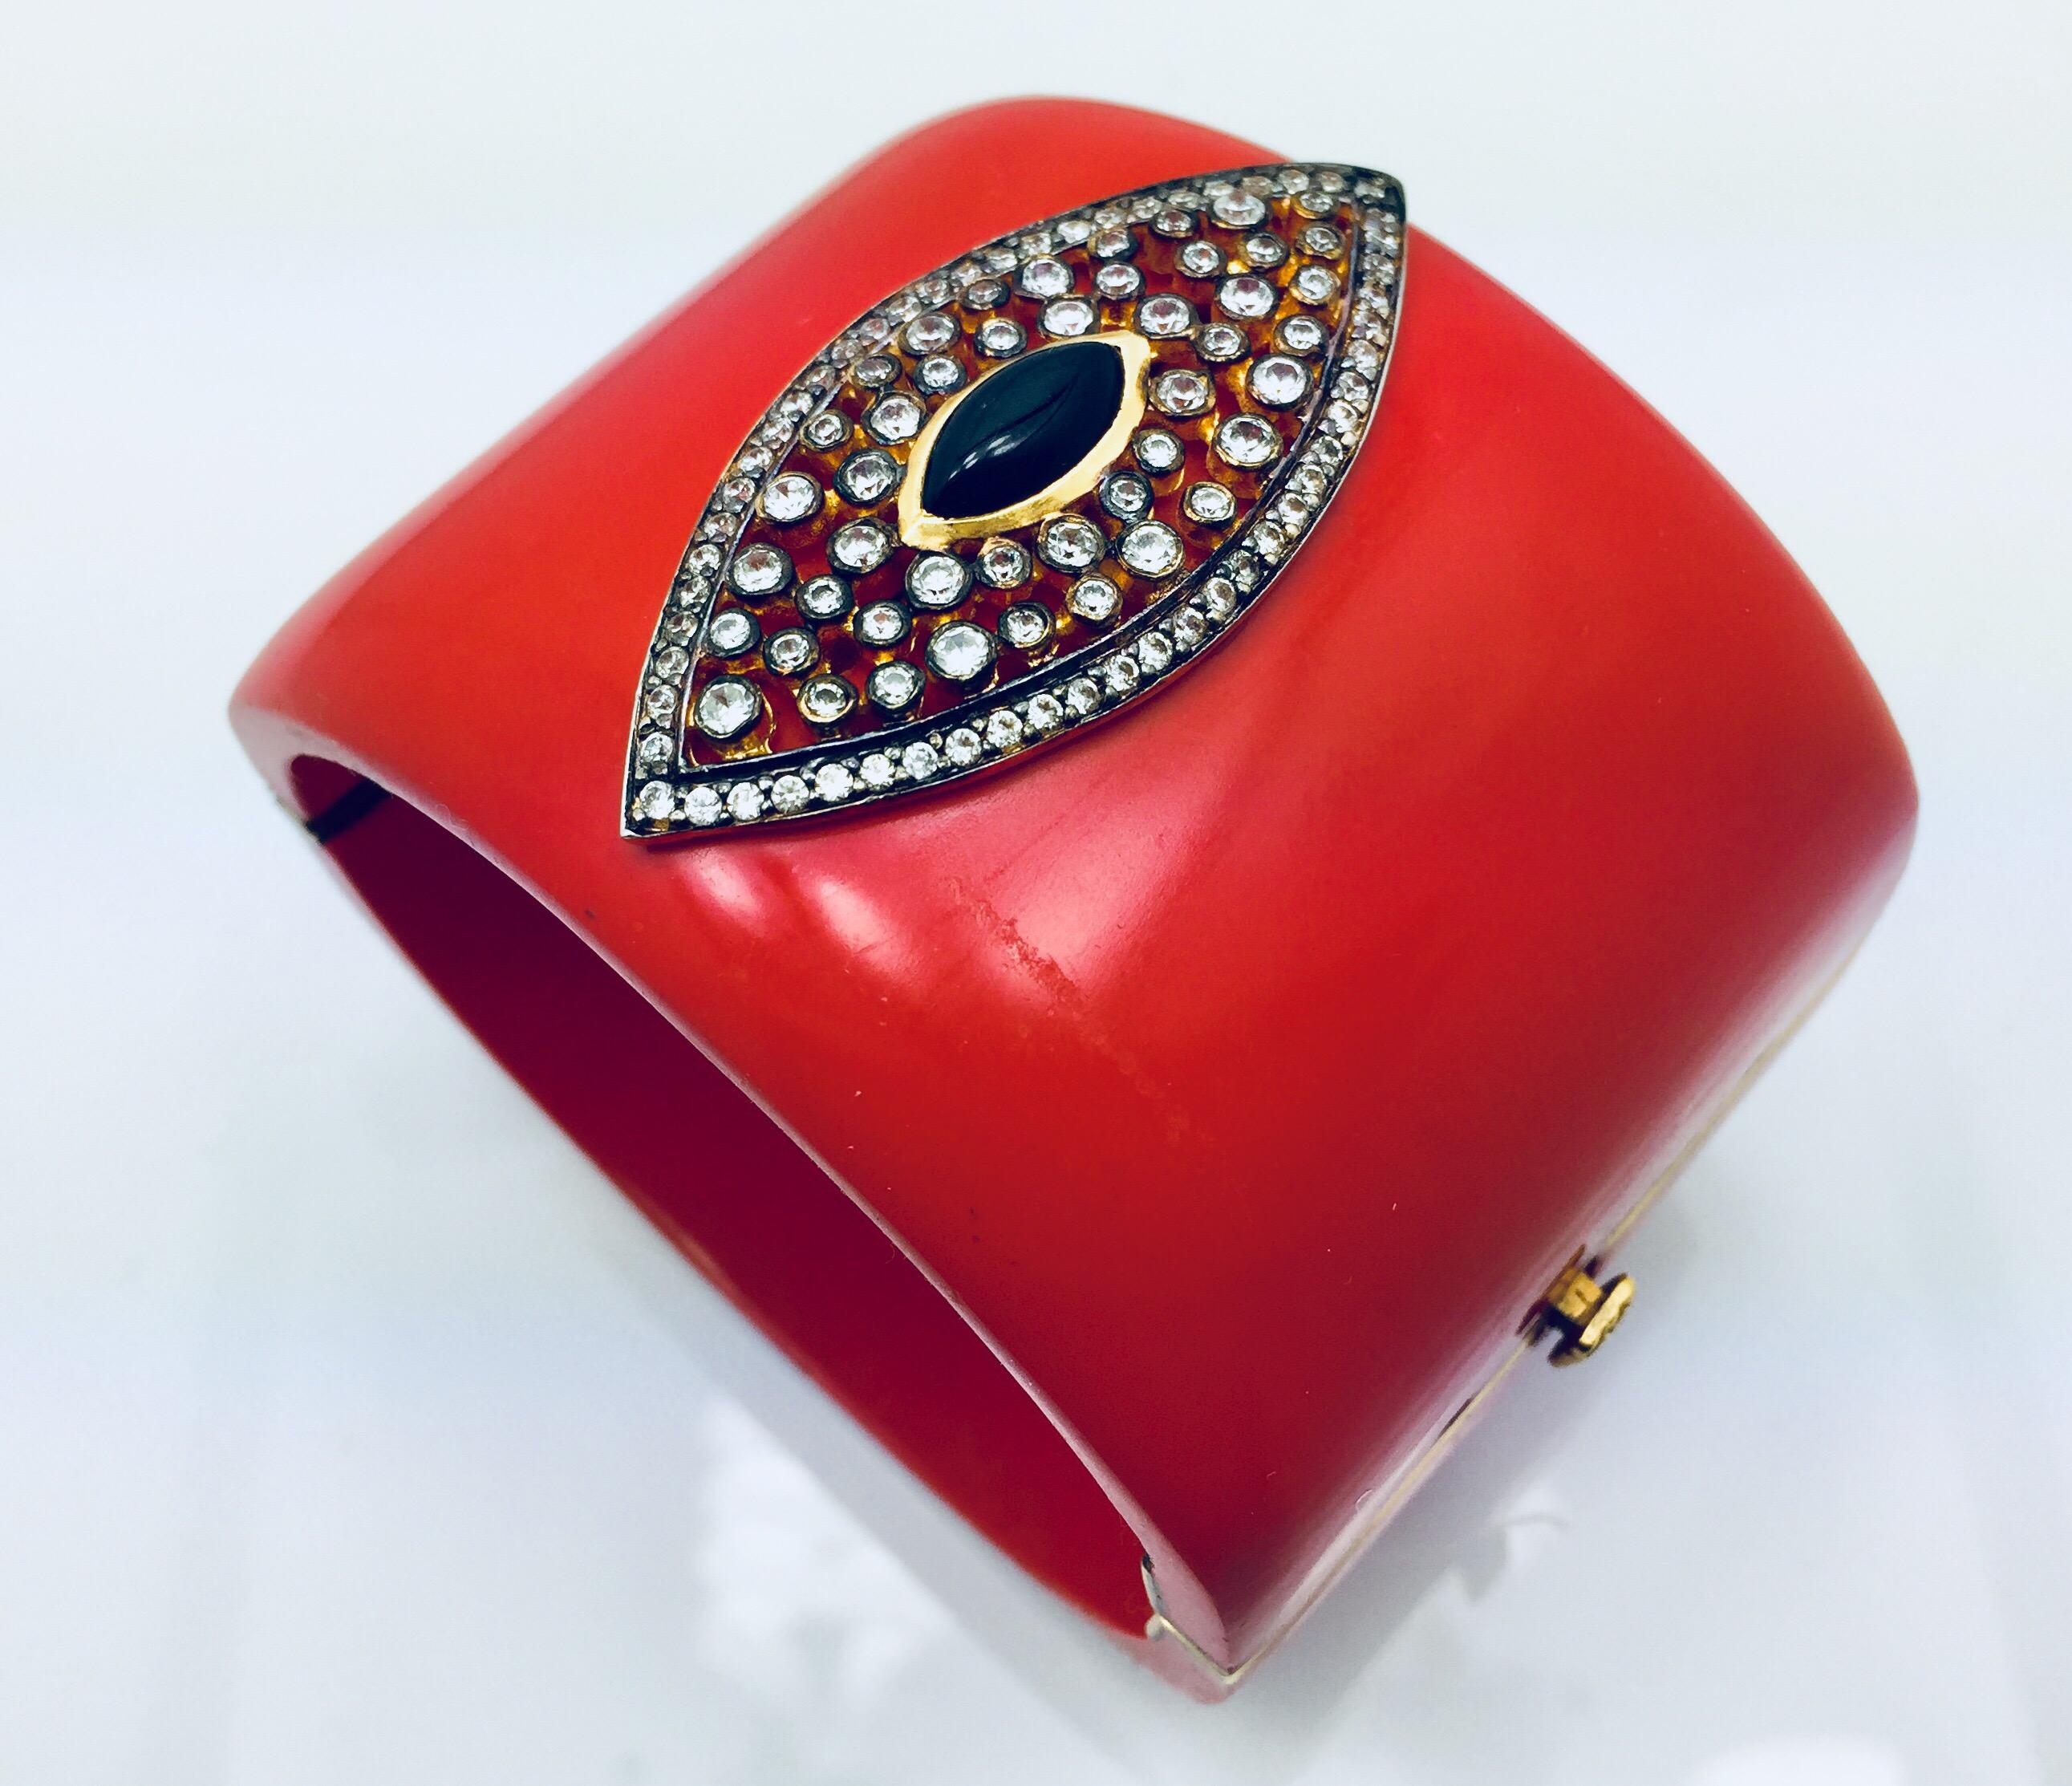 The red marquise cuff is a cuff even wonder woman would be envious of. The bold piece includes a marquise cut black onyx stone surrounded by a cubic zircon. The bracelet is hinged and fastens with a push tab insert closure.   As featured in Vogue